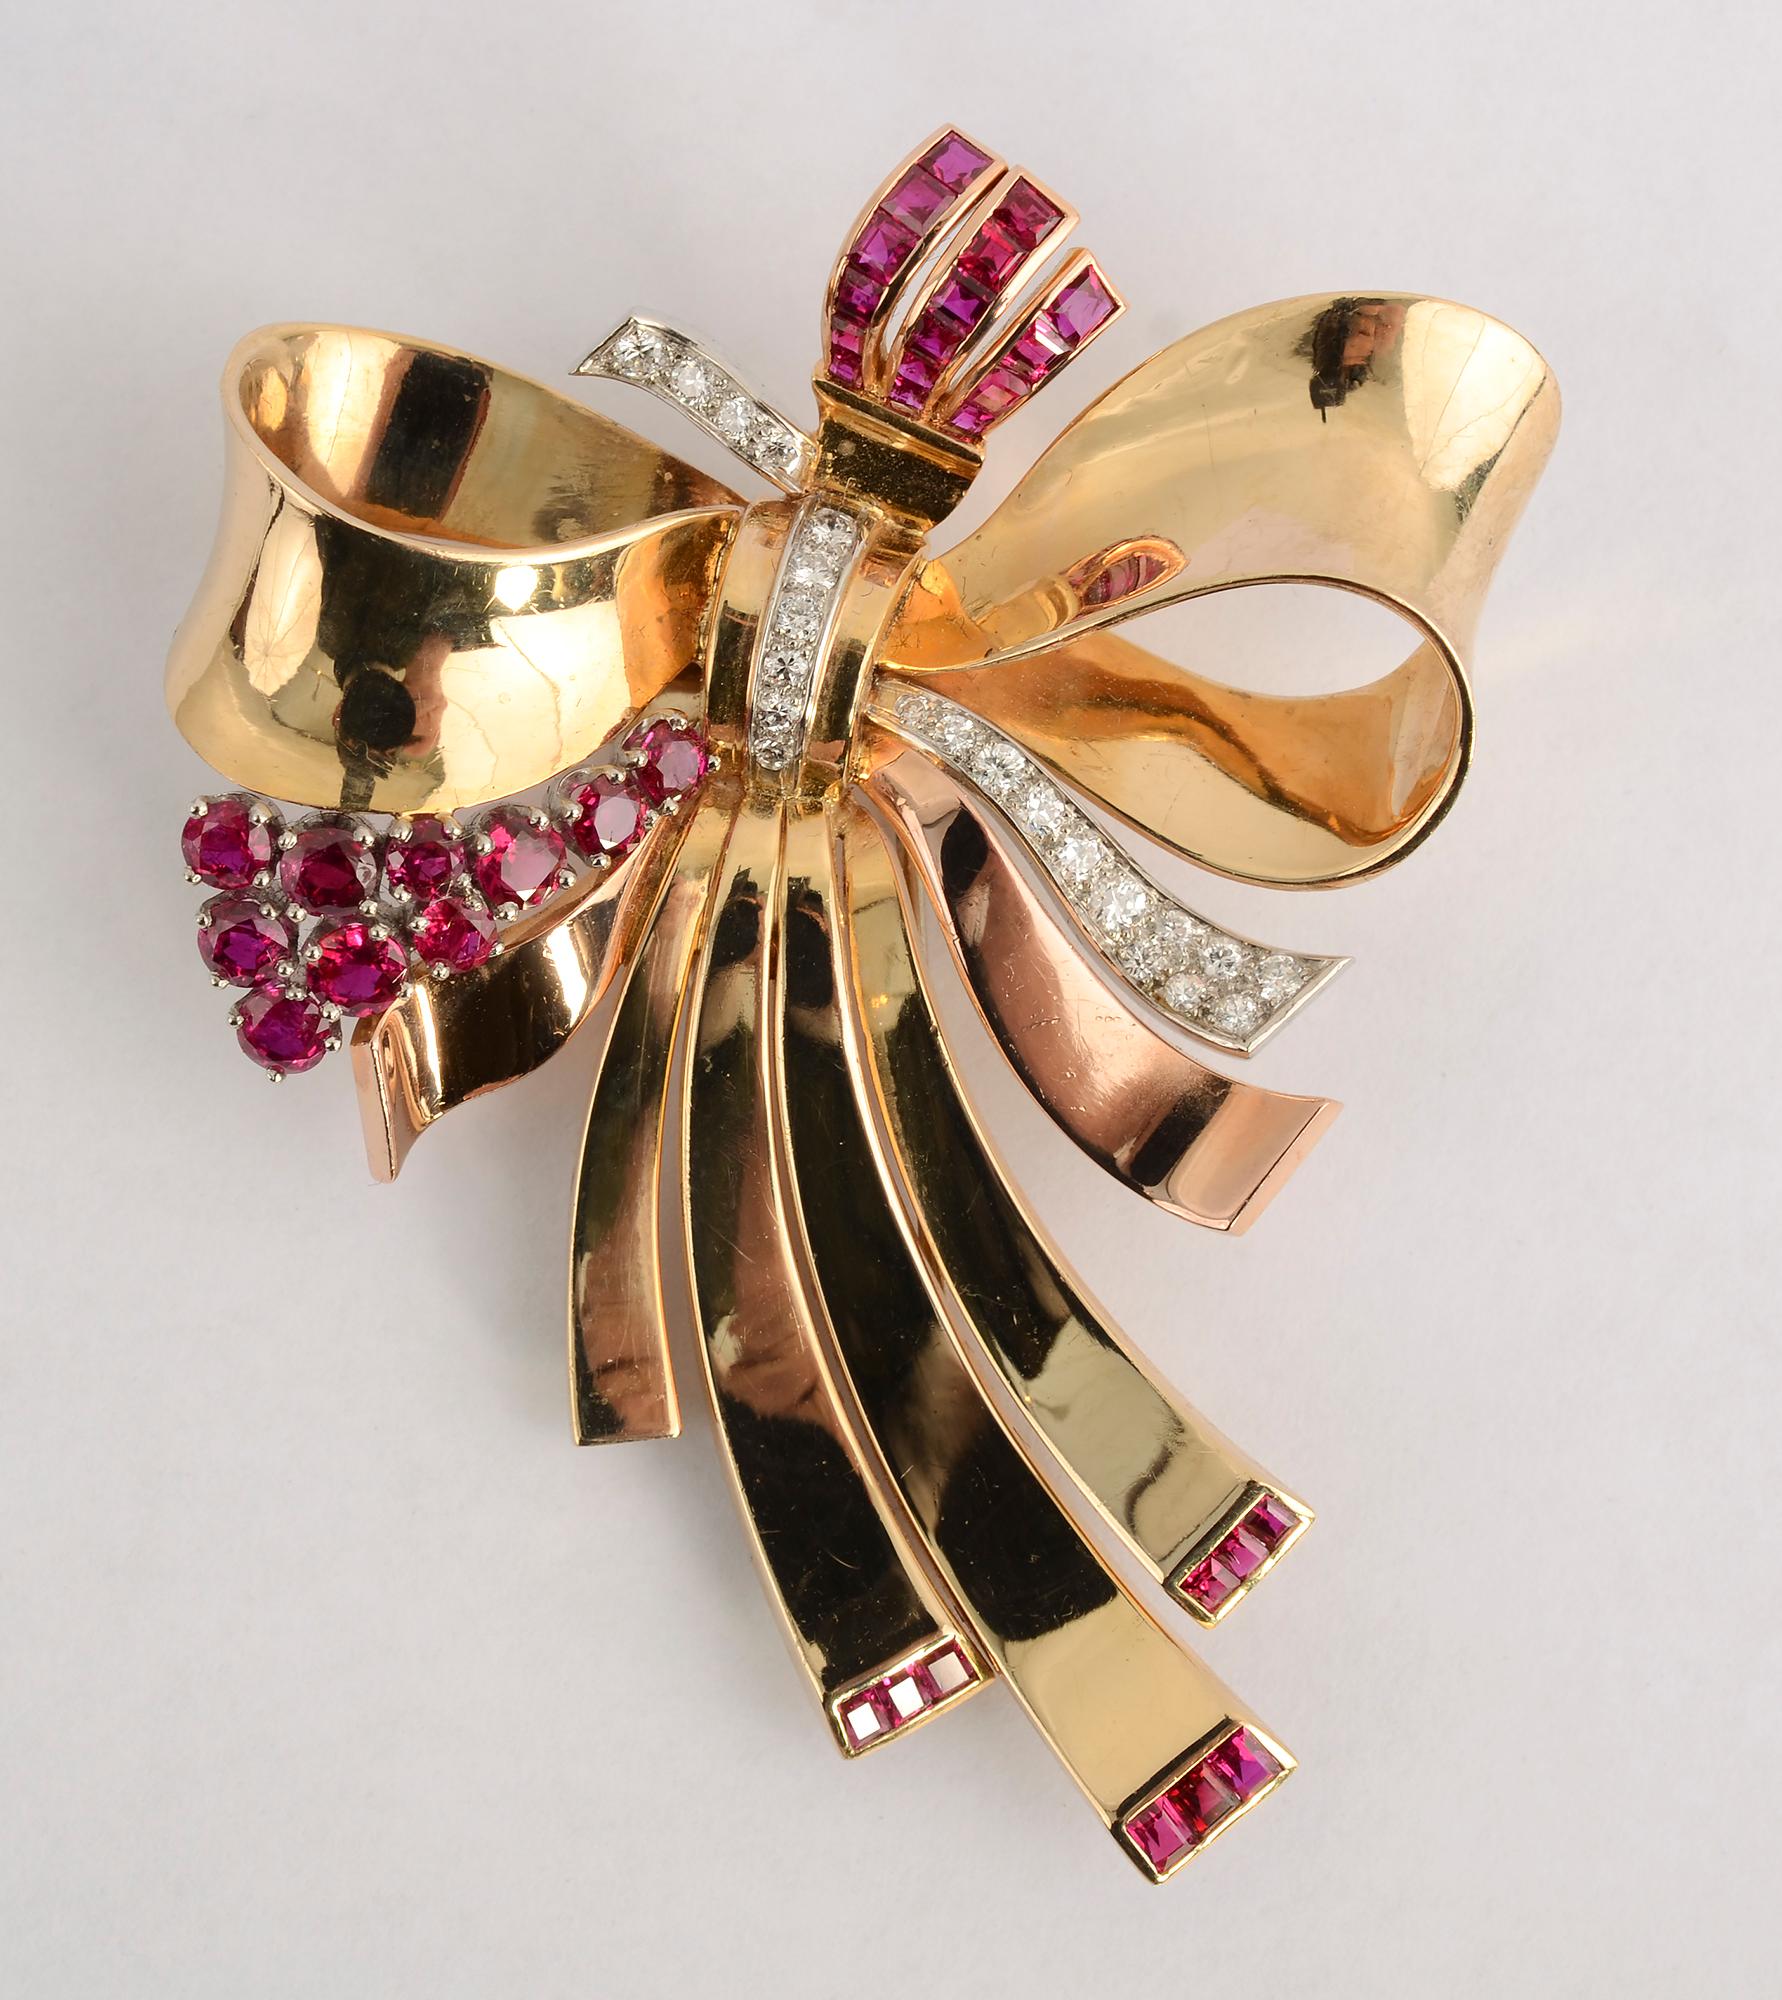 Elegant gold bow brooch with natural rubies and diamonds. The brooch is quintessentially Retro in design. It is finely made with wonderful curvature to the gold effectively giving the look of fabric. Rubies set at the bottom of the brooch are a